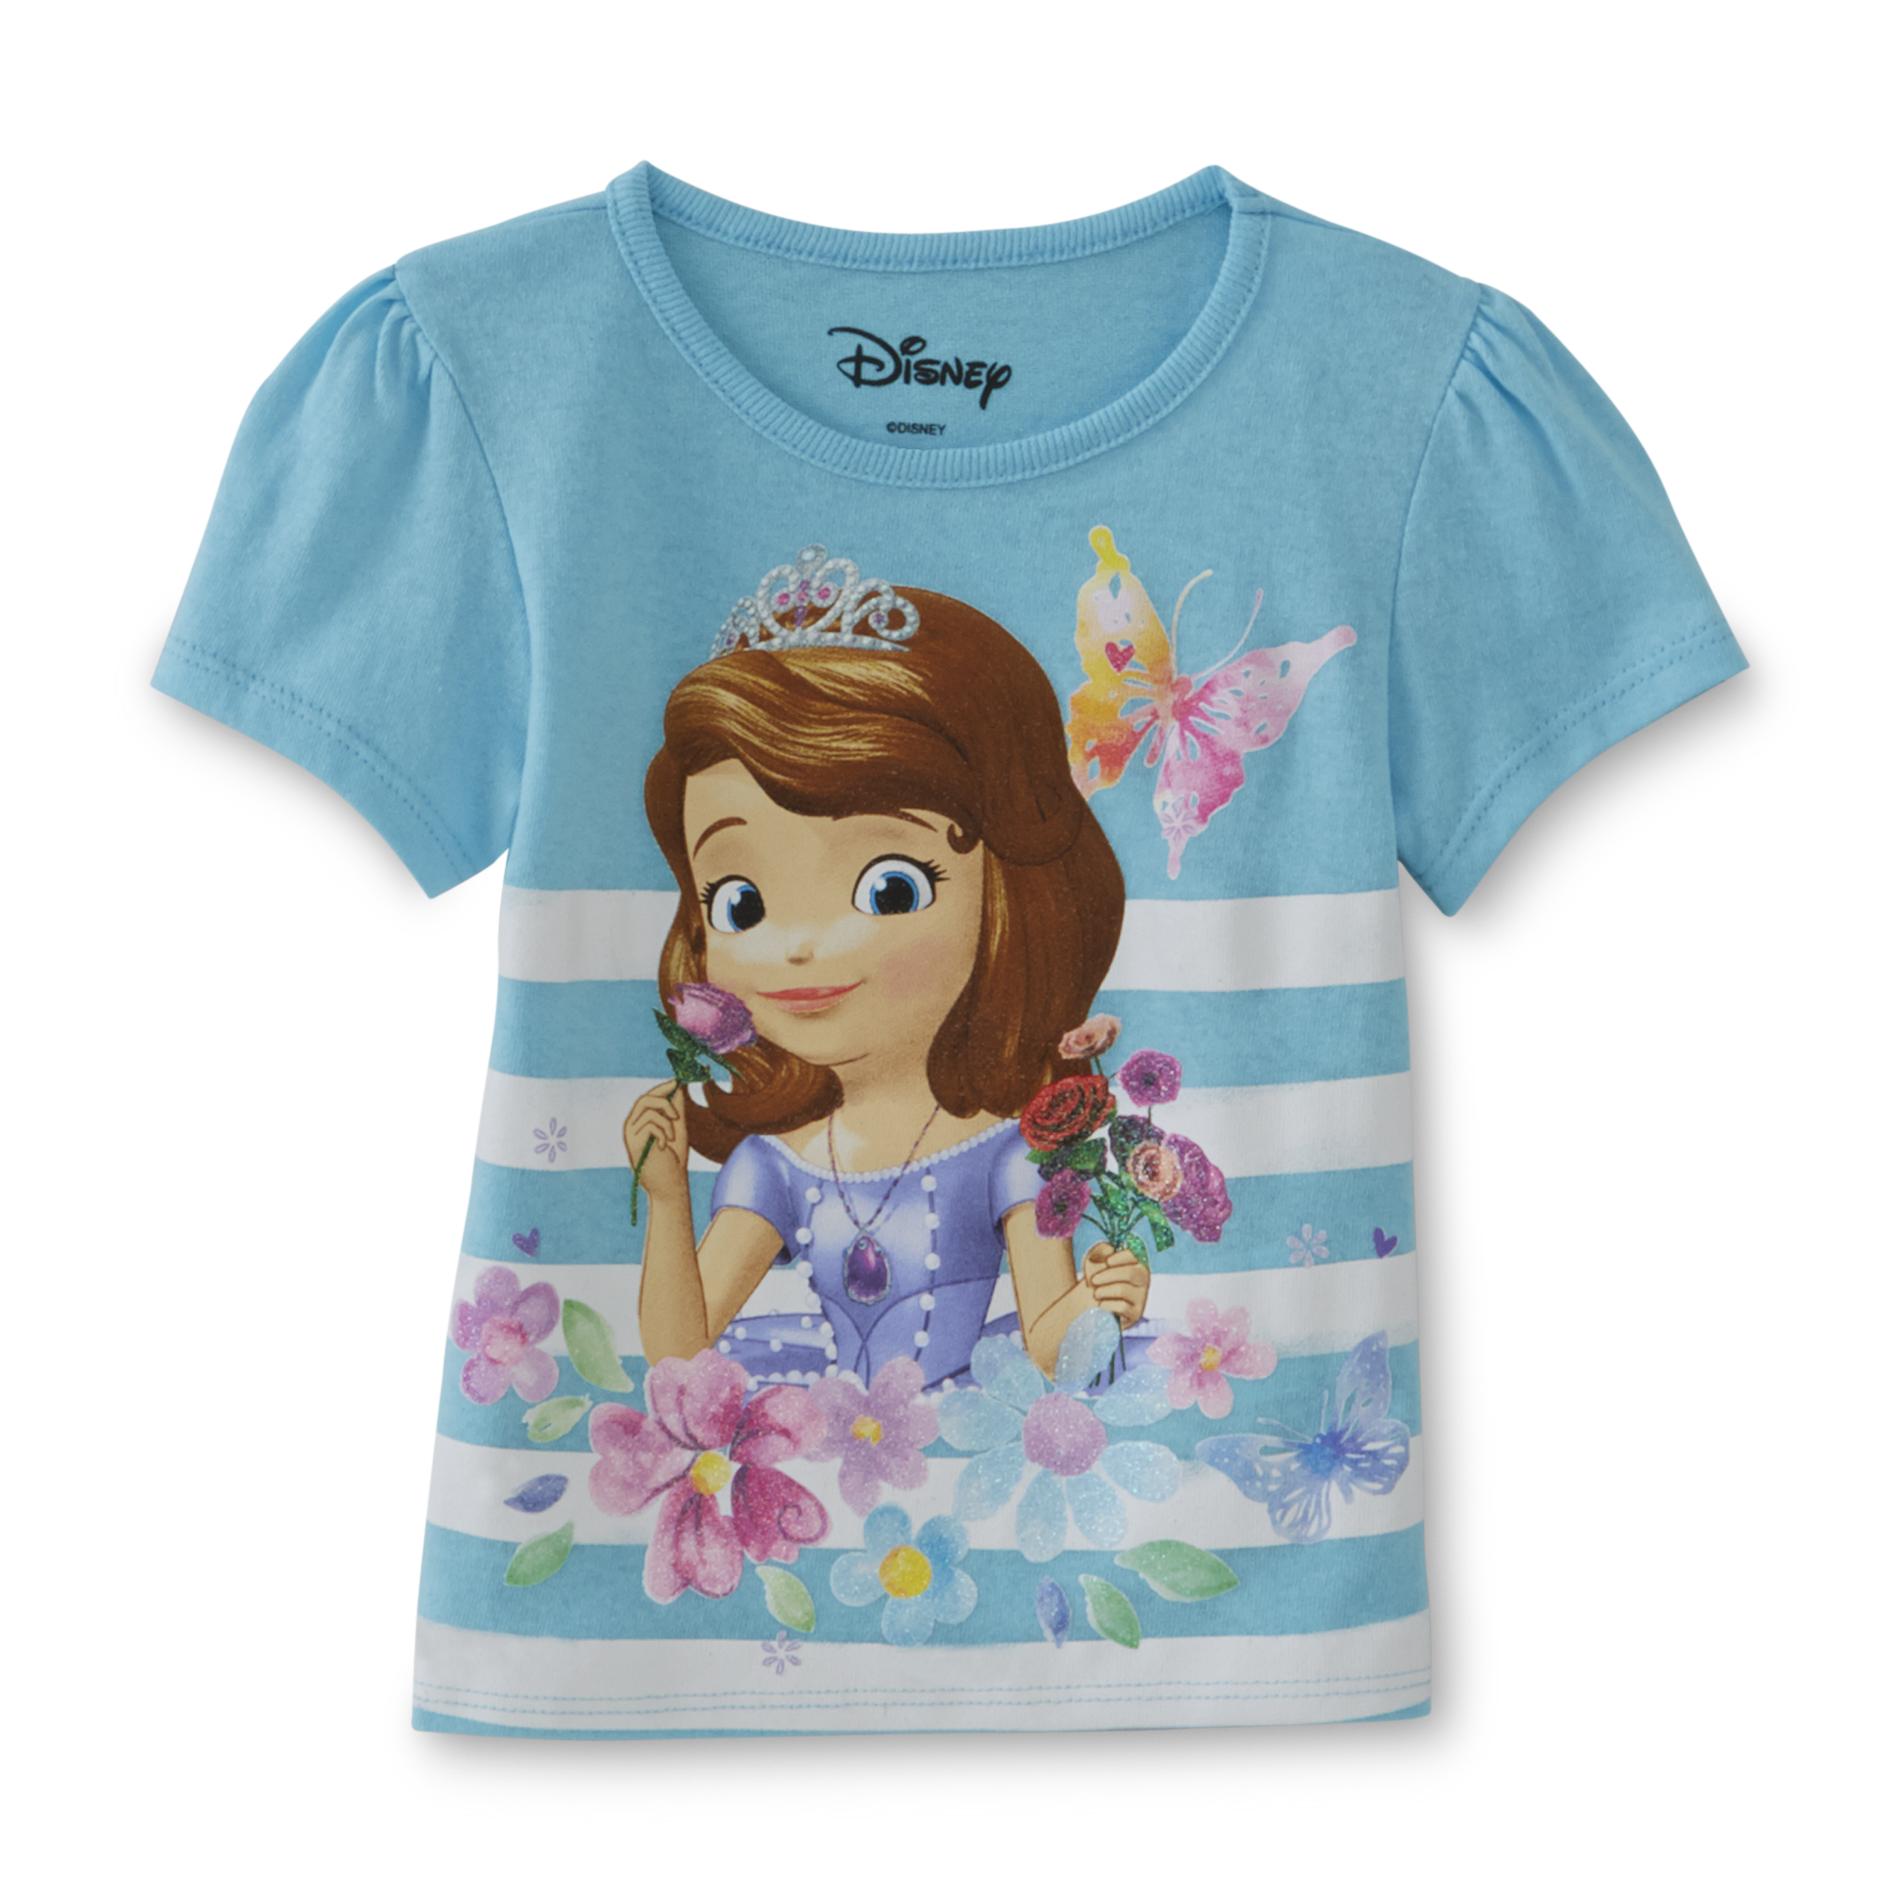 Disney Sofia the First Toddler Girl's Graphic T-Shirt